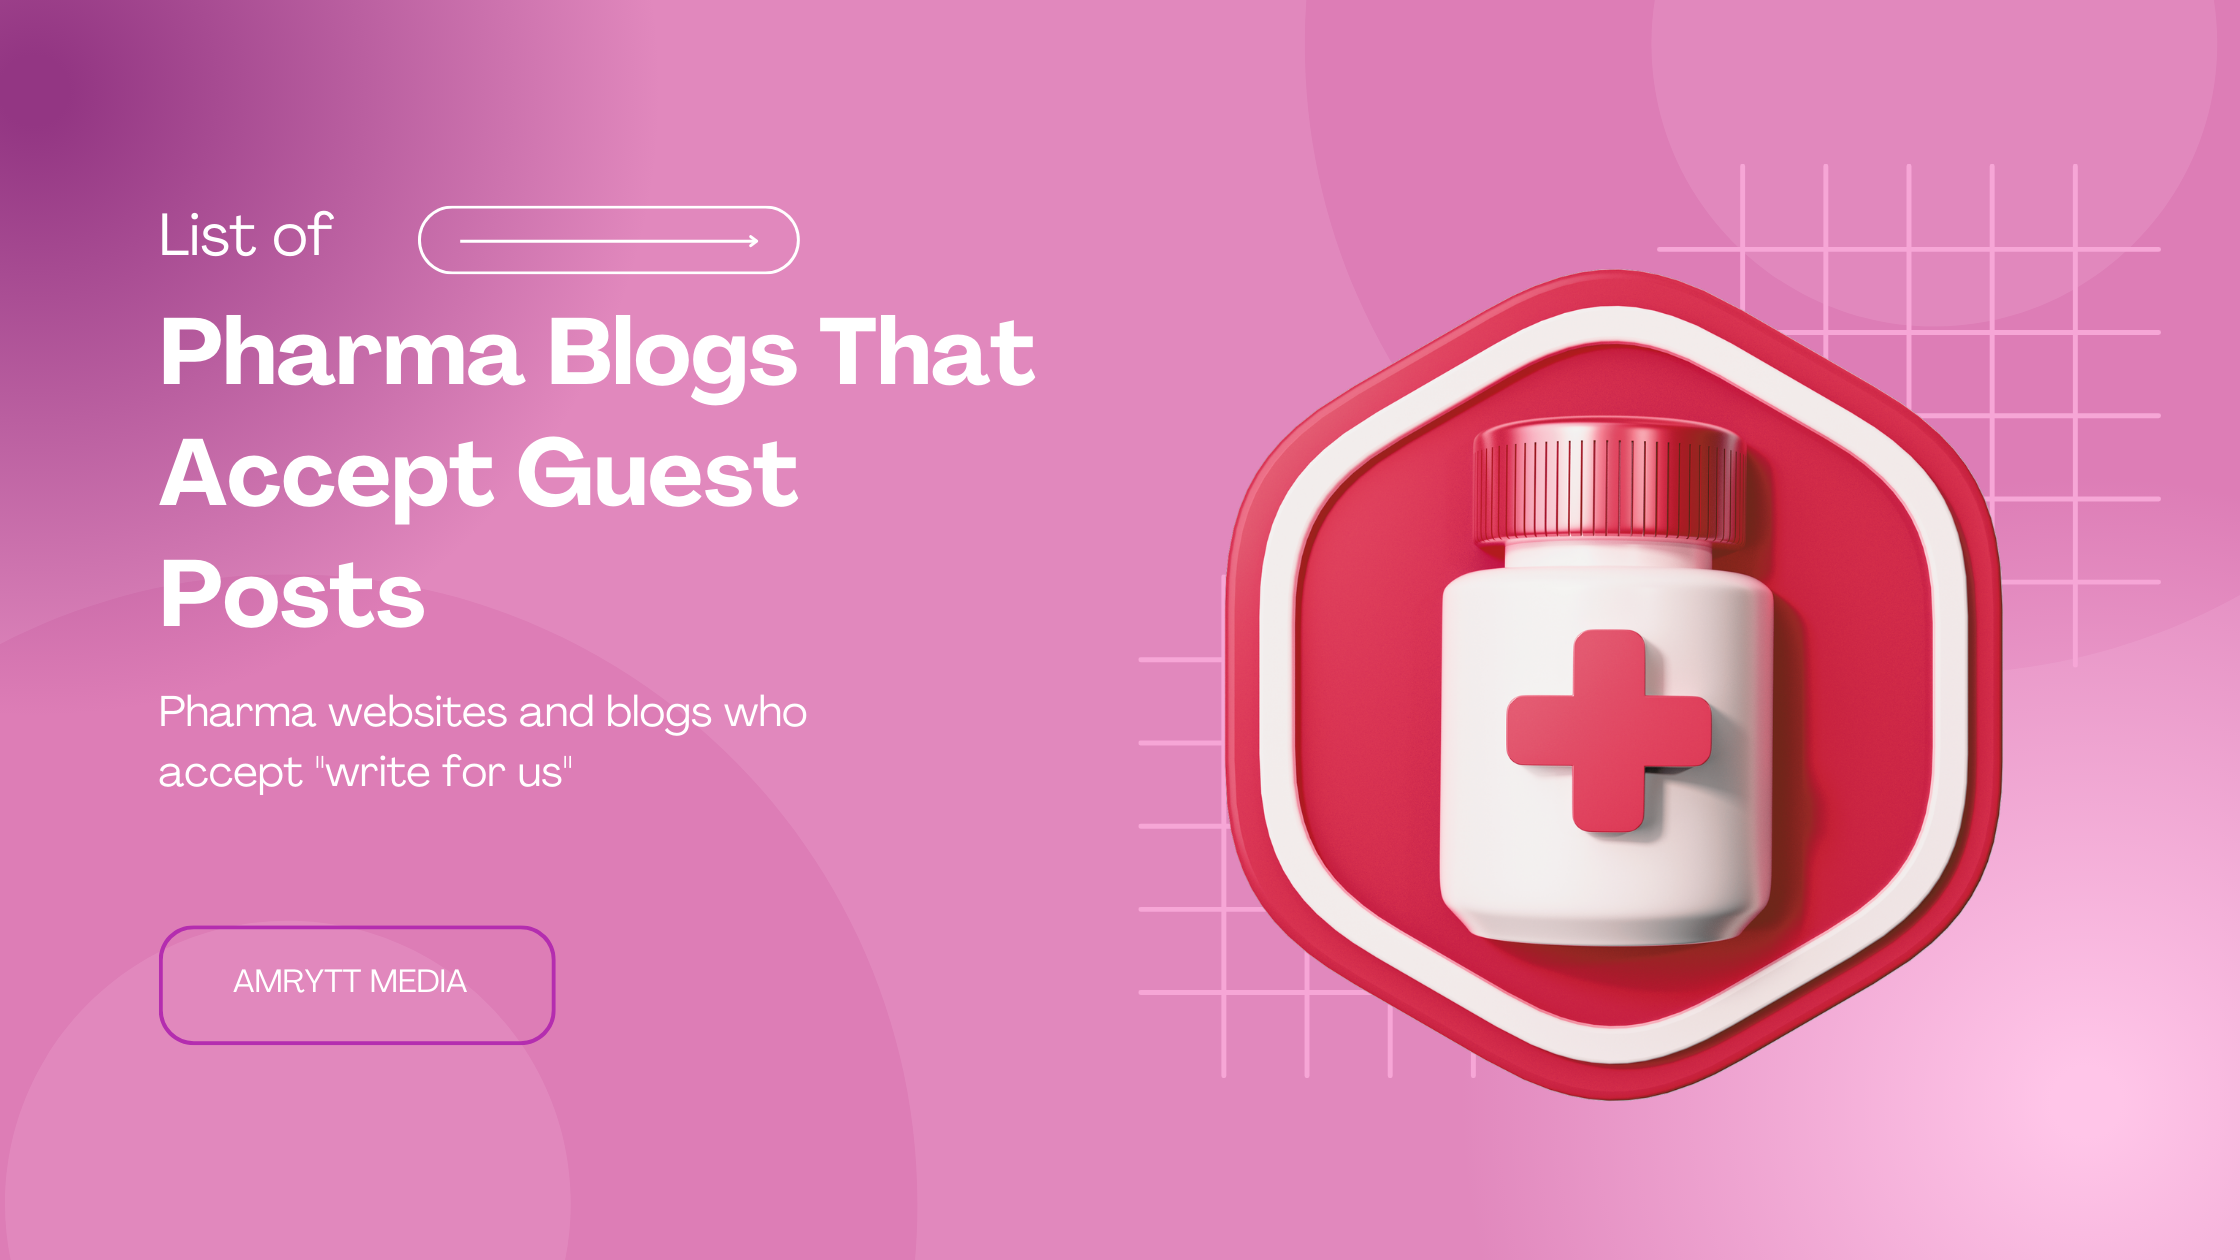 Pharma Blogs That Accept Guest Posts